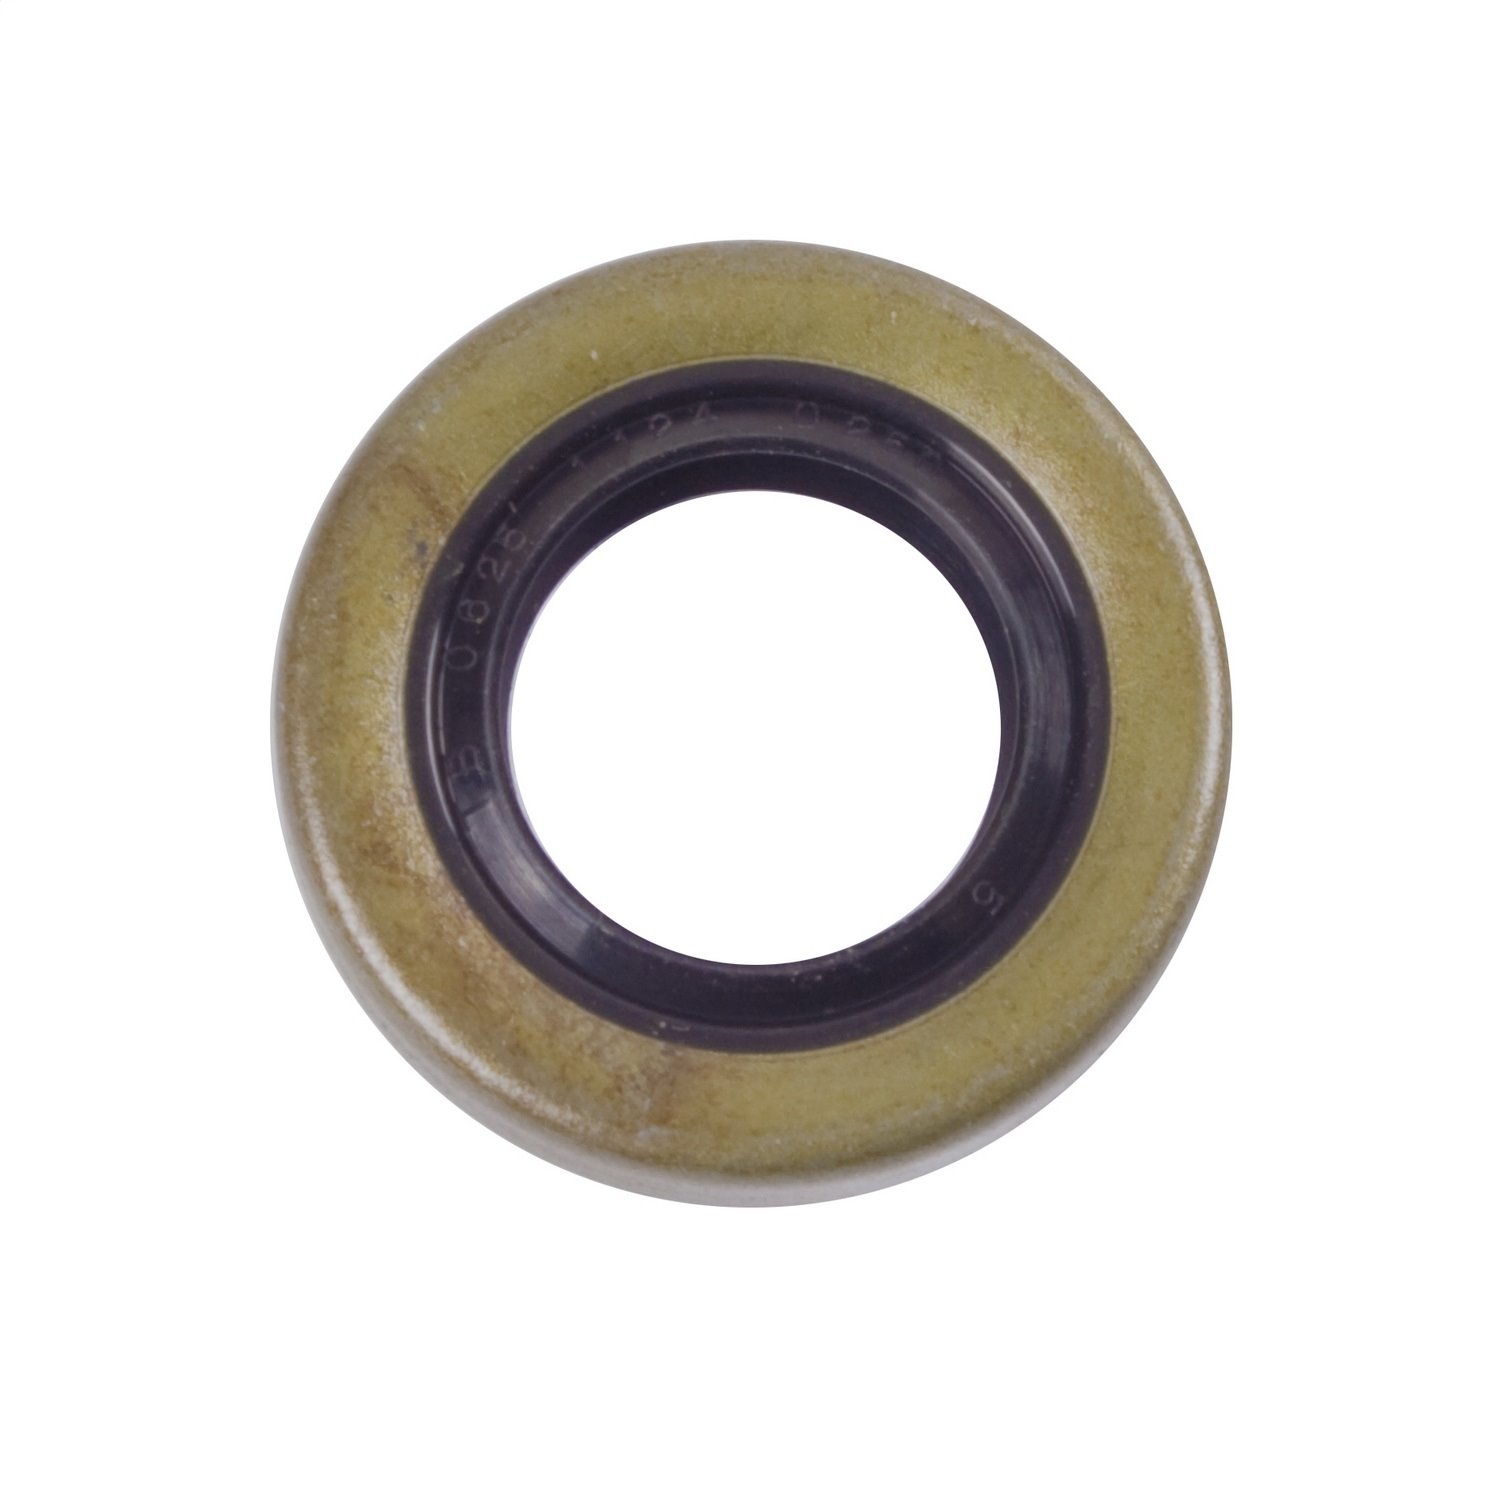 Shift Rod Seal for Dana 18 1945-1986 Willys Jeep/Wrangler By Omix-ADA